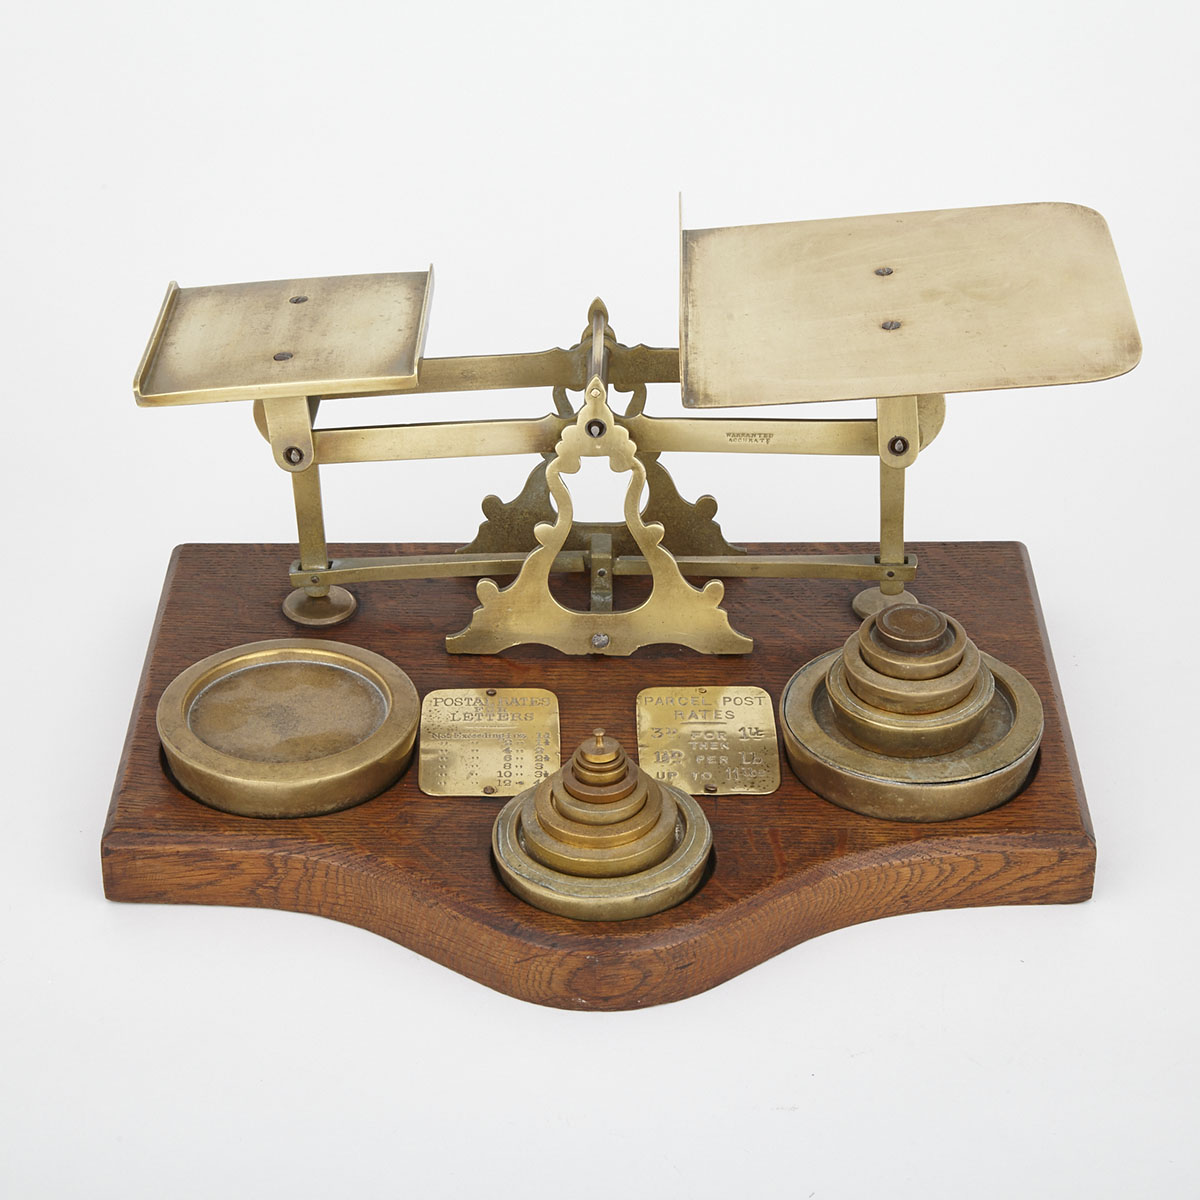 Large Canadian Brass and Oak Postal Scale, 19th century